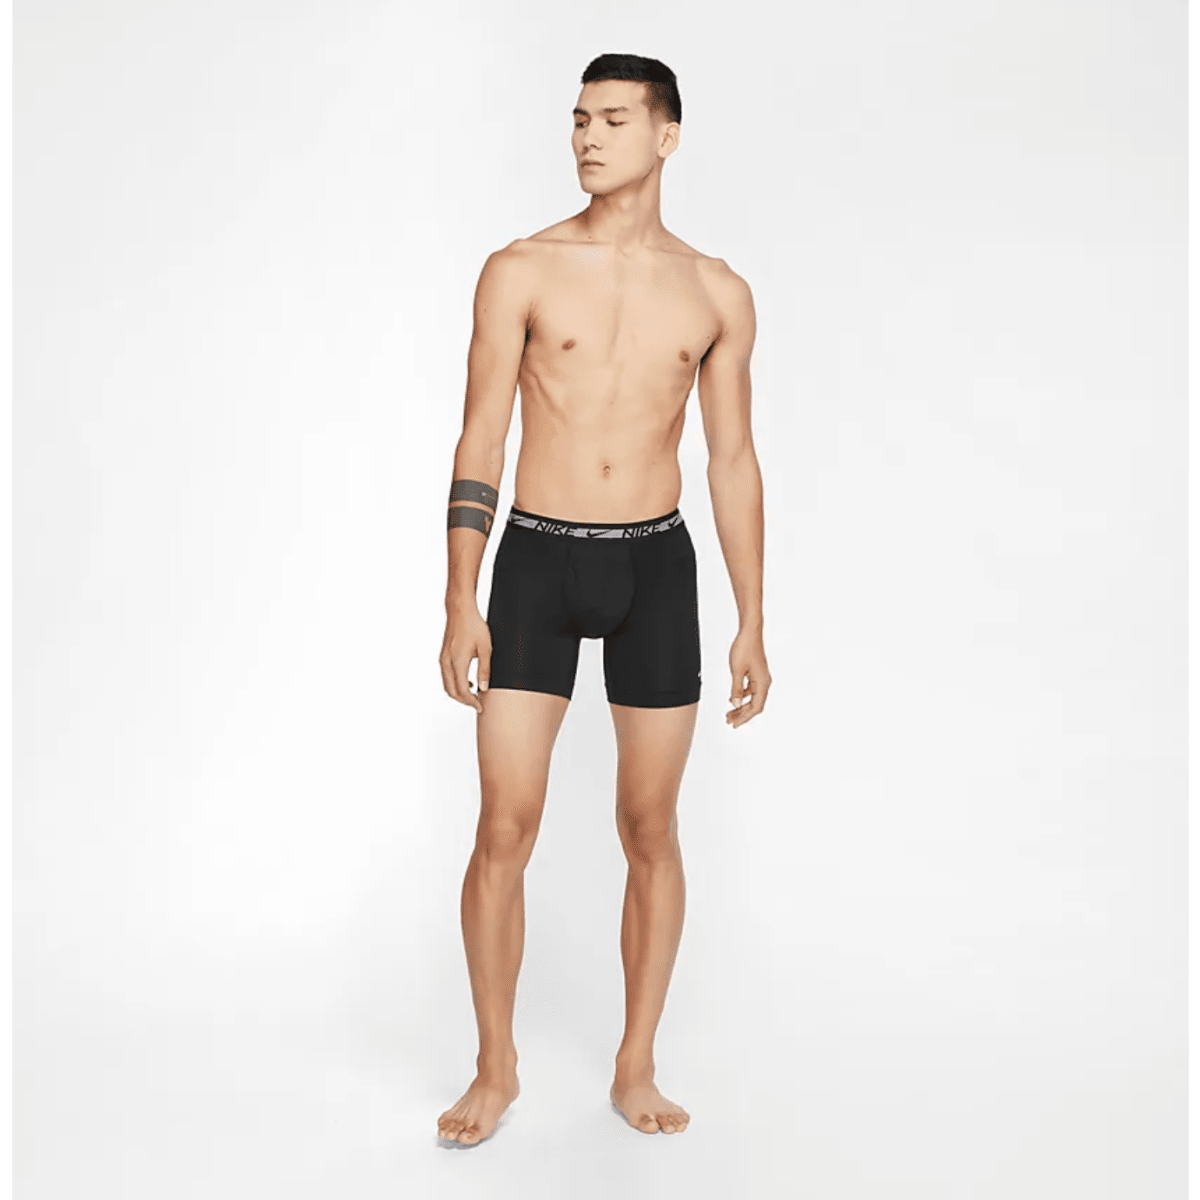 Reach A New Level Of Comfort With These Nike Boxer Briefs - Men's